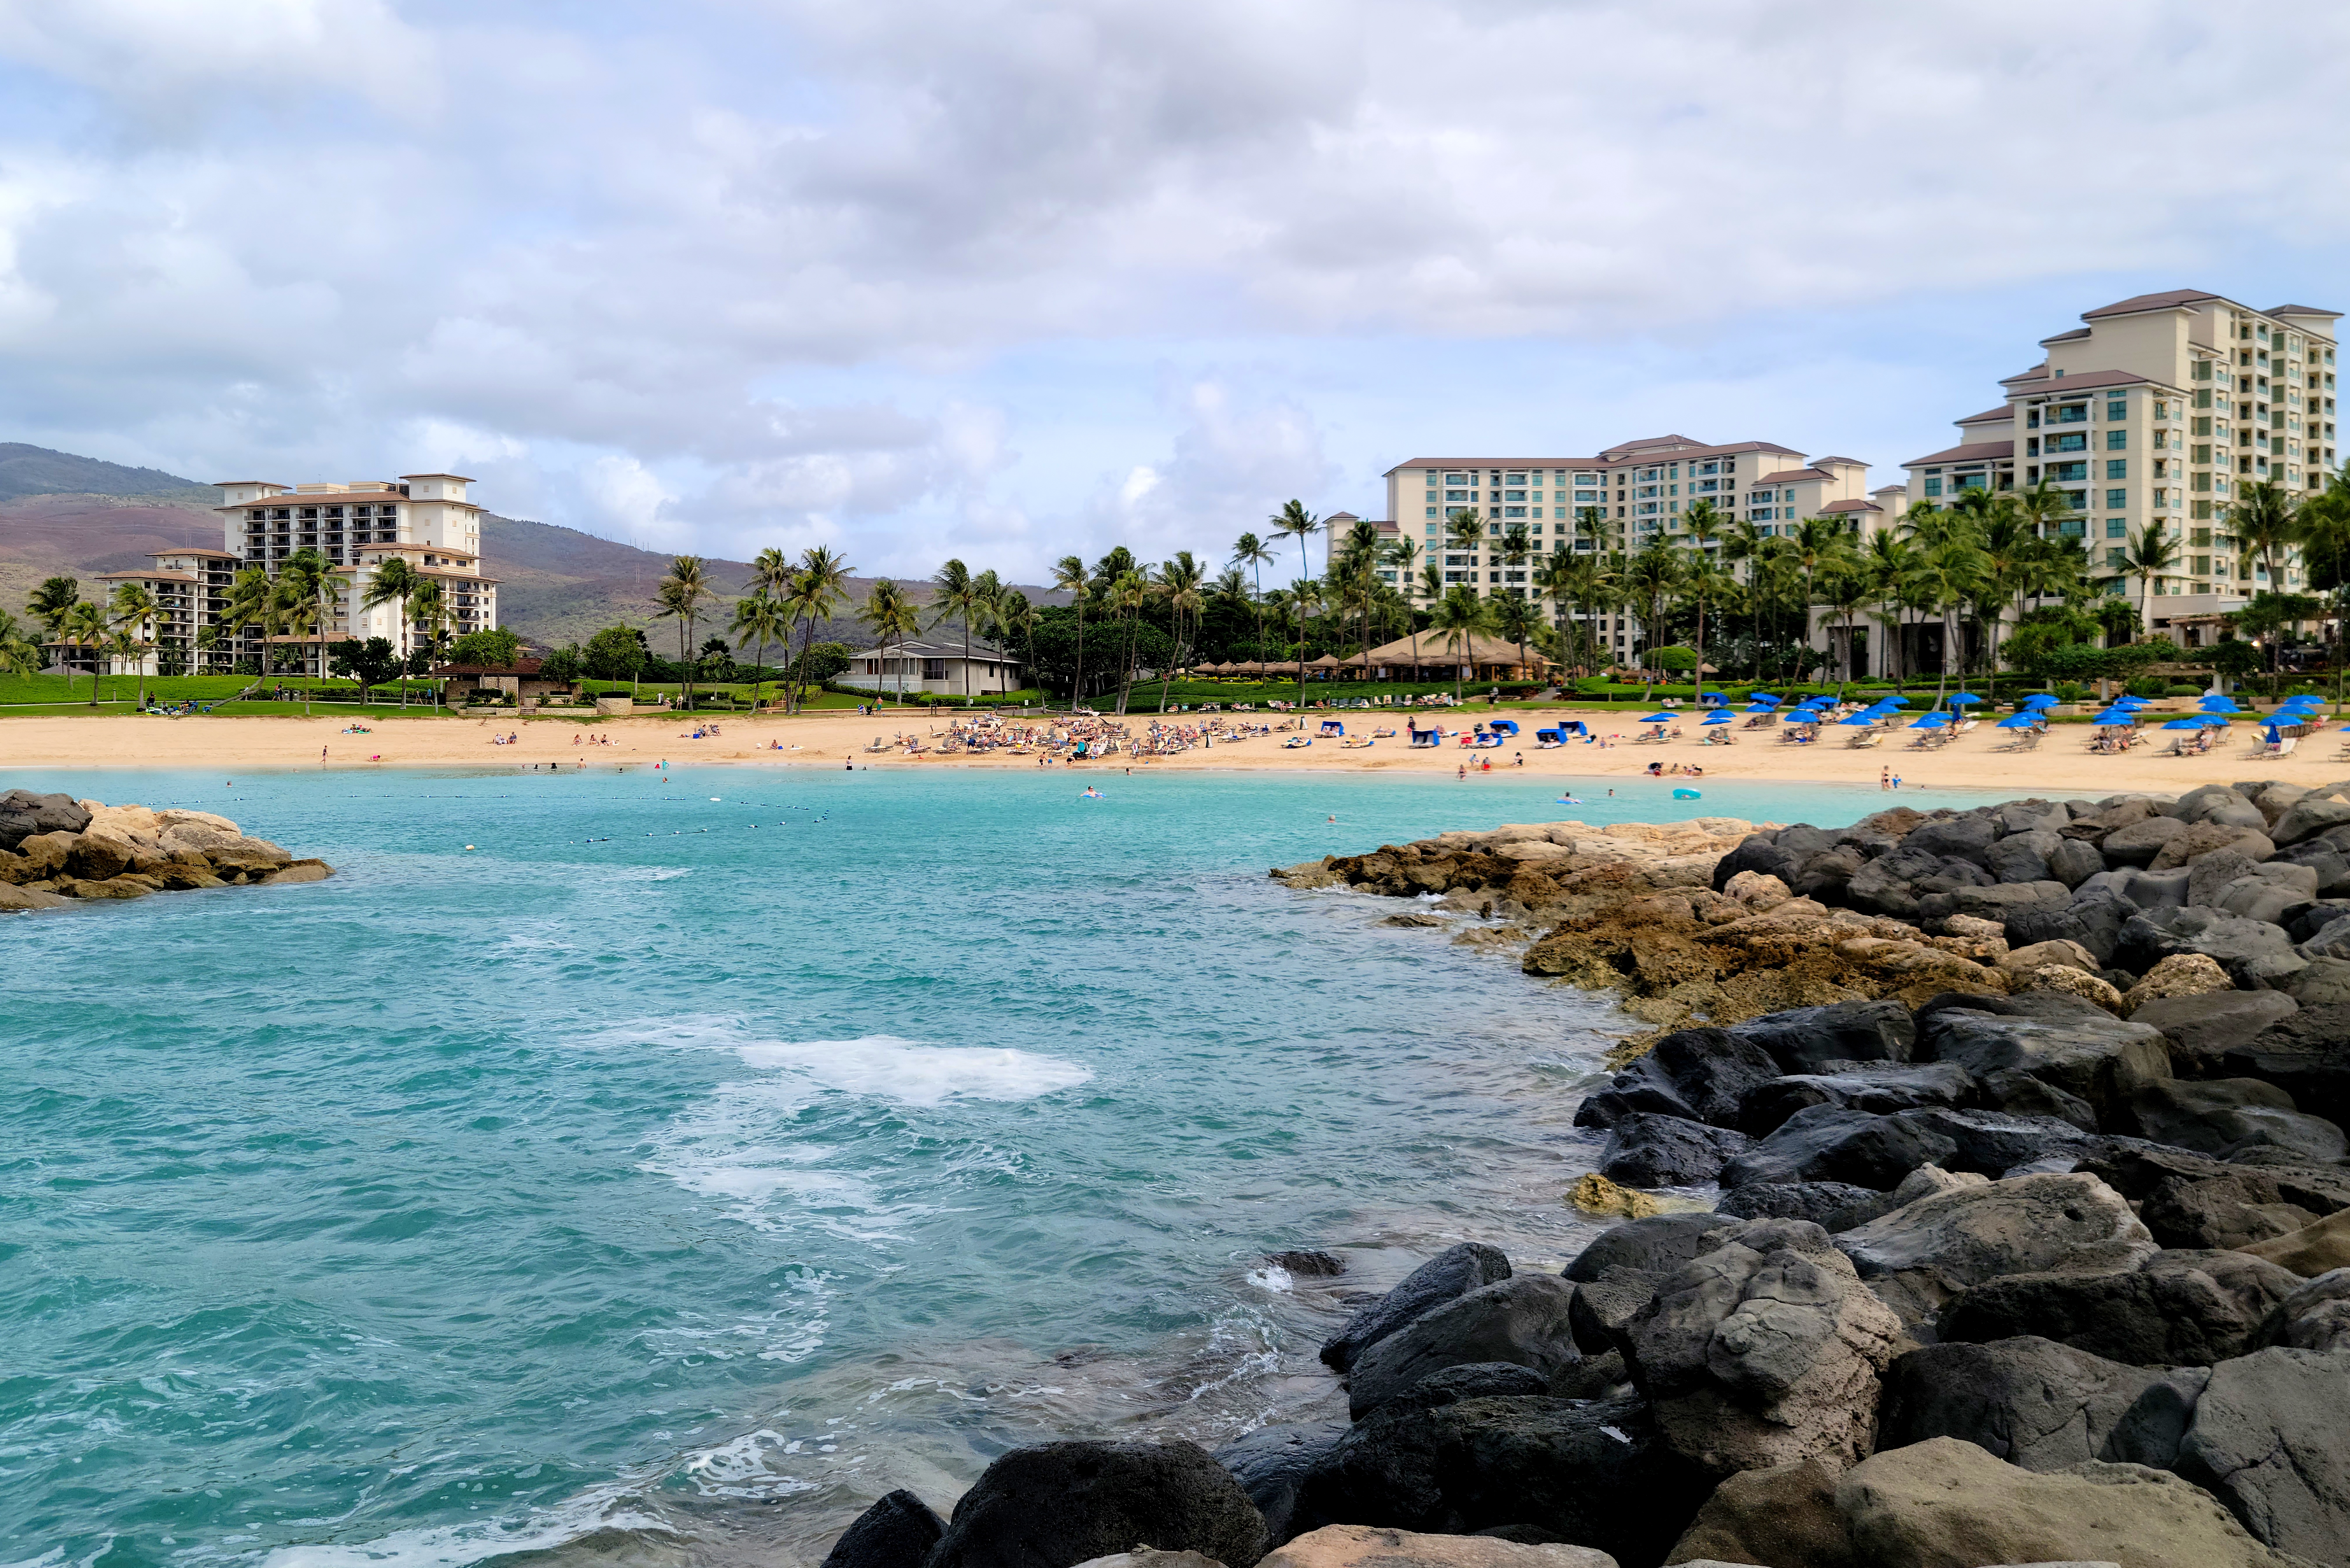 Come to Honolulu for the beaches, stay for the shopping